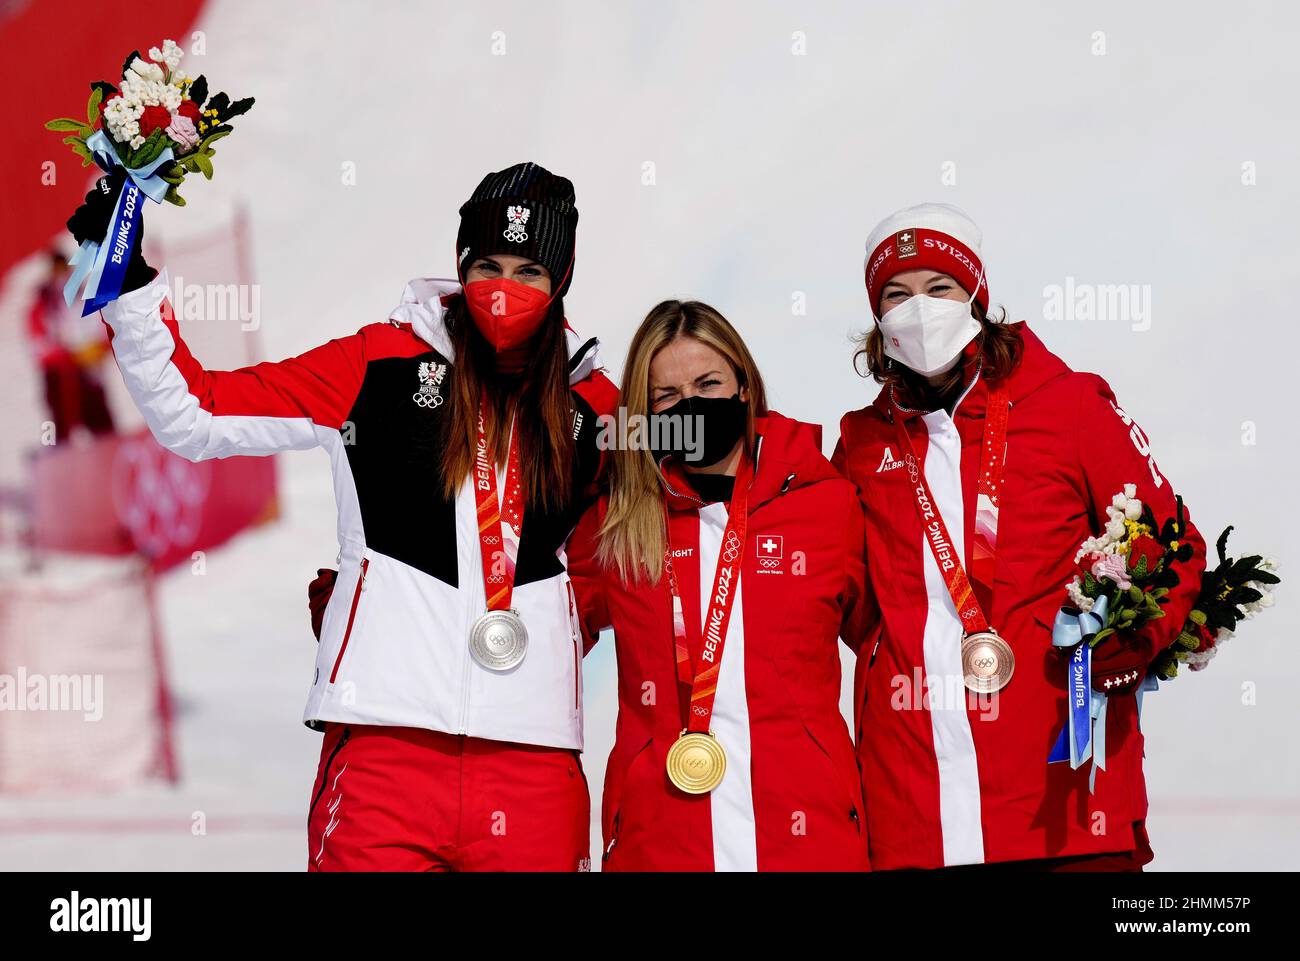 Beijing, China. 11th Feb, 2022. The medalists in the women's Super-G event (L-R) Mirjam Puchner, Austria, silver; Lara Gut-Behrami, Switzerland, gold and Michelle Gisin, Switzerland, bronze pose on the podium at the Winter Olympics in Beijing on Friday February 11, 2022. Photo by Rick T. Wilking/UPI Credit: UPI/Alamy Live News Stock Photo